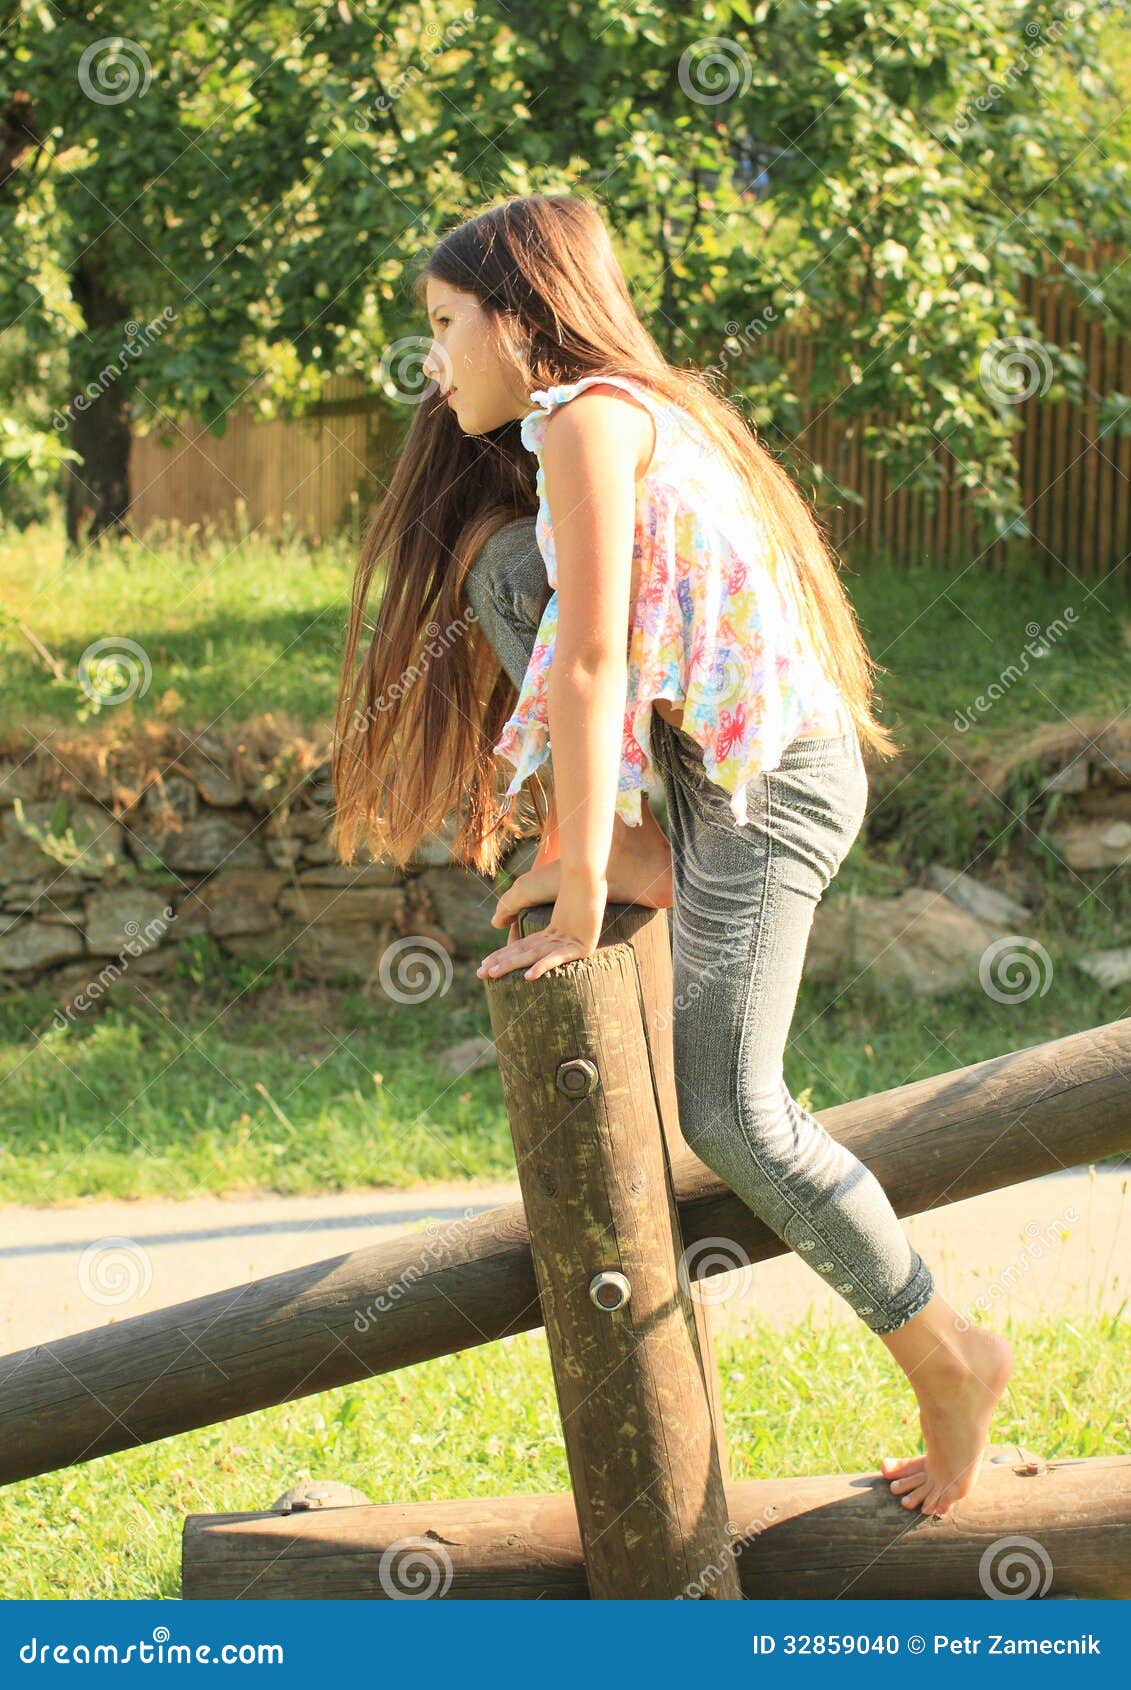 https://thumbs.dreamstime.com/z/girl-mounting-wooden-construction-barefoot-t-shirt-colorful-butterflies-grey-pants-swing-32859040.jpg